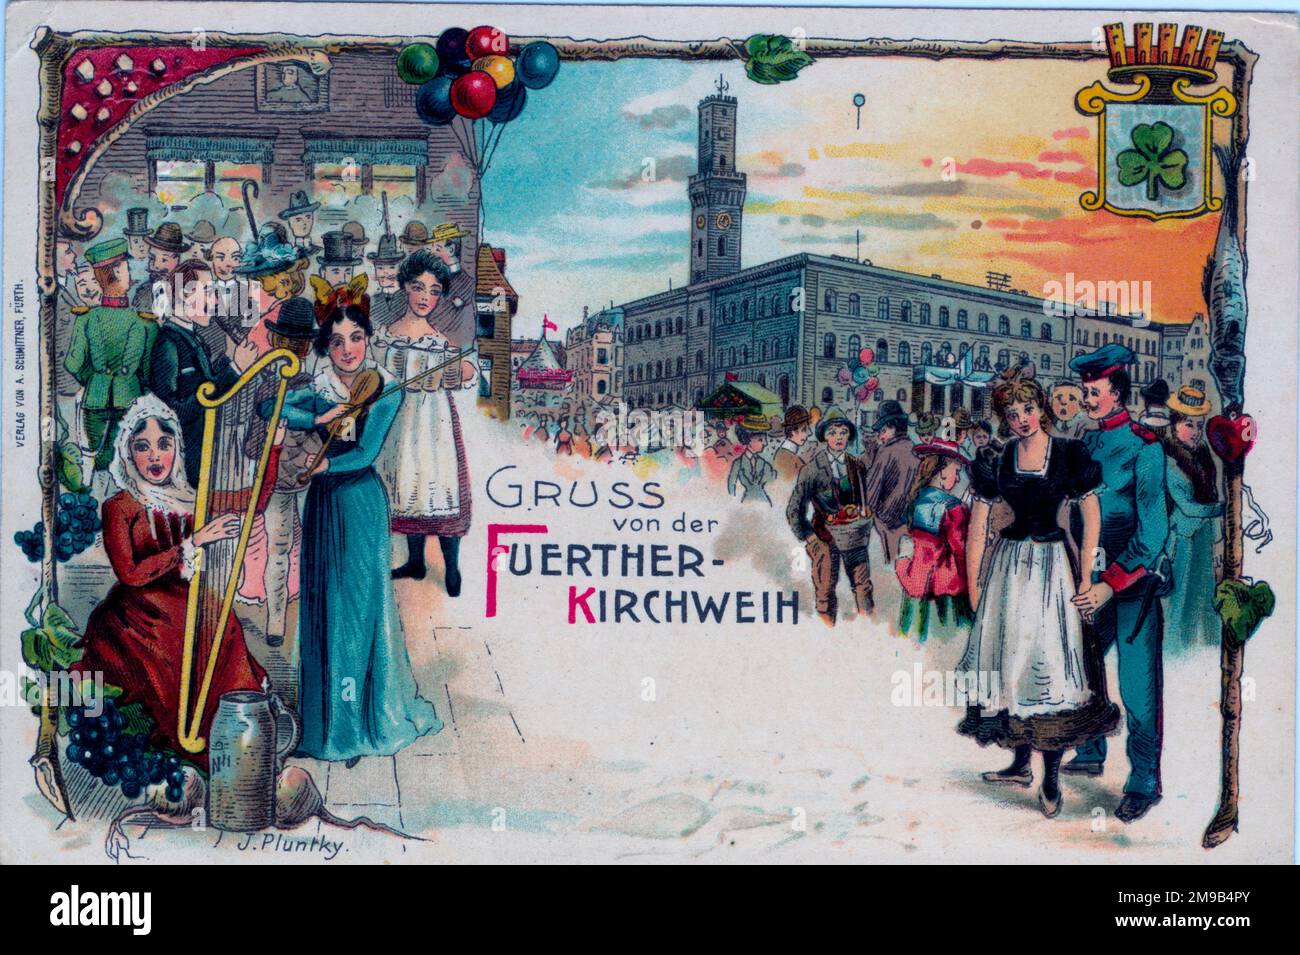 The card shows revellers in a crowd in festive costumes - soldiers, musicians and serving maids etc.It is from Fuerther-Kirchweih which is famous for its festivals. Stock Photo